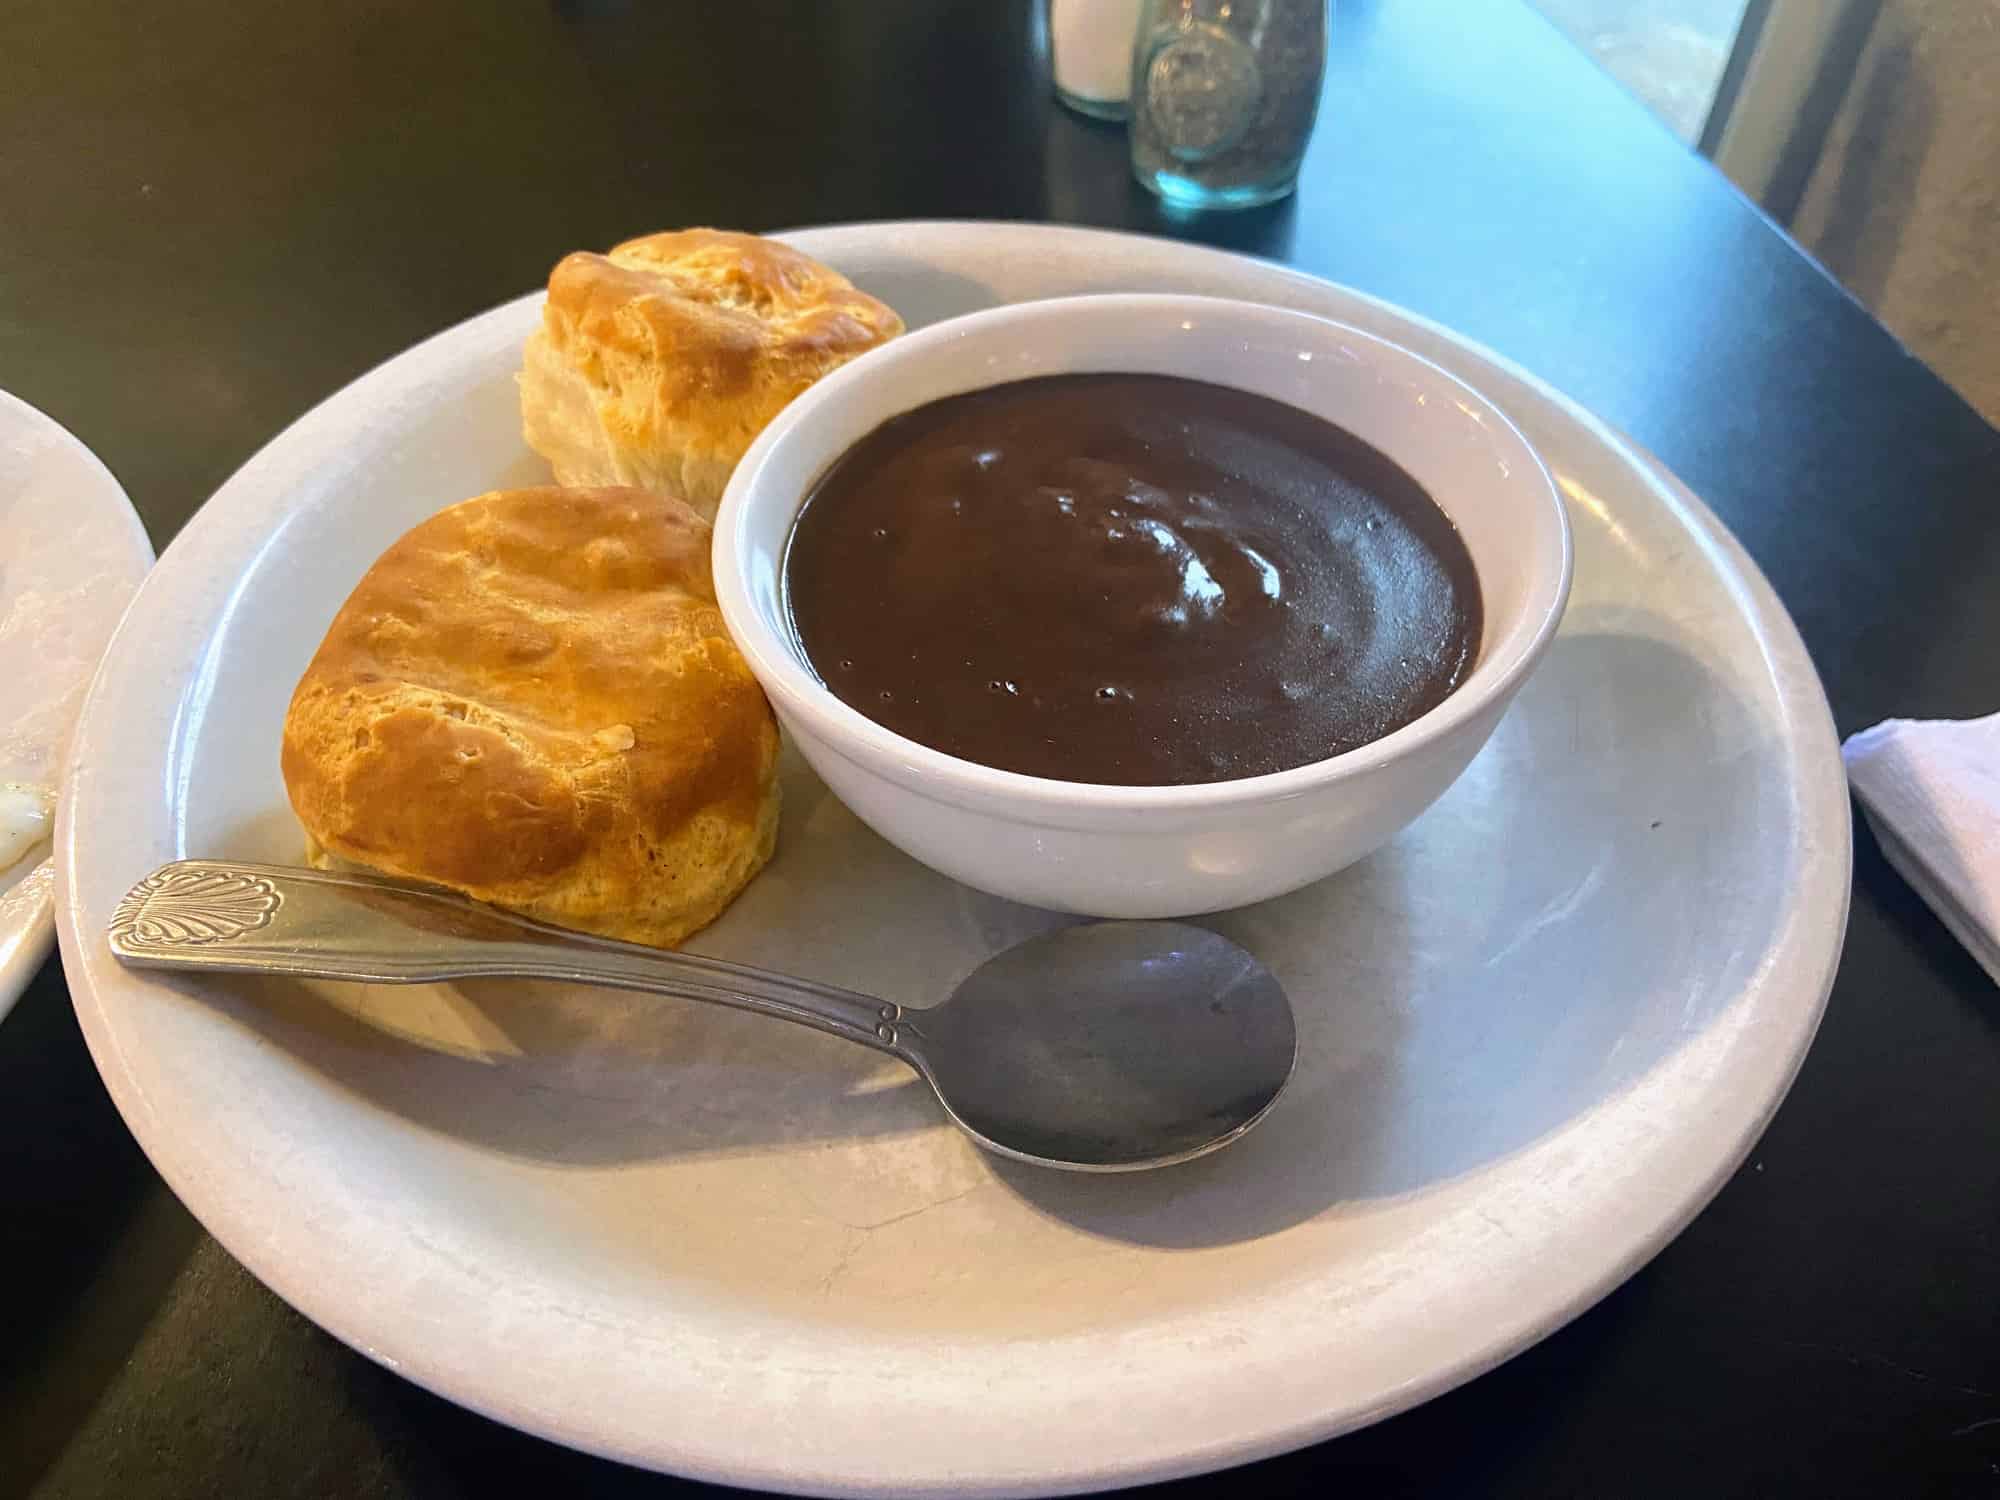 Chocolate gravy with biscuits